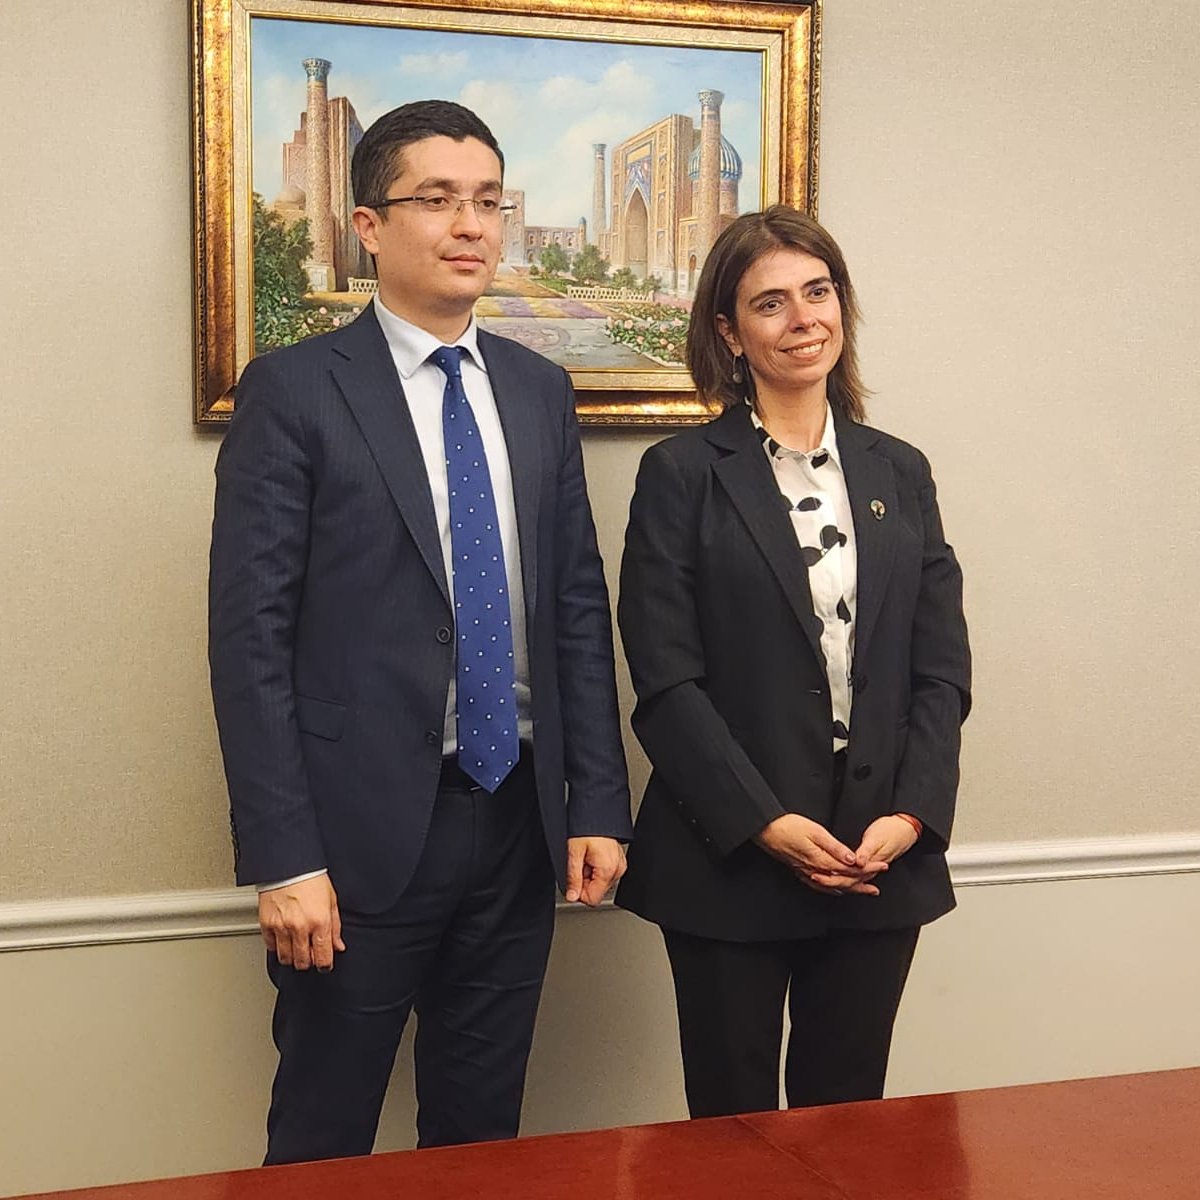 Productive discussion with H.E. @AmbLapasov, the Permanent Representative of Uzbekistan to the @UN at #CSW68. We look forward to expanding our areas of cooperation in the country to advance gender equality and women’s empowerment in Uzbekistan.